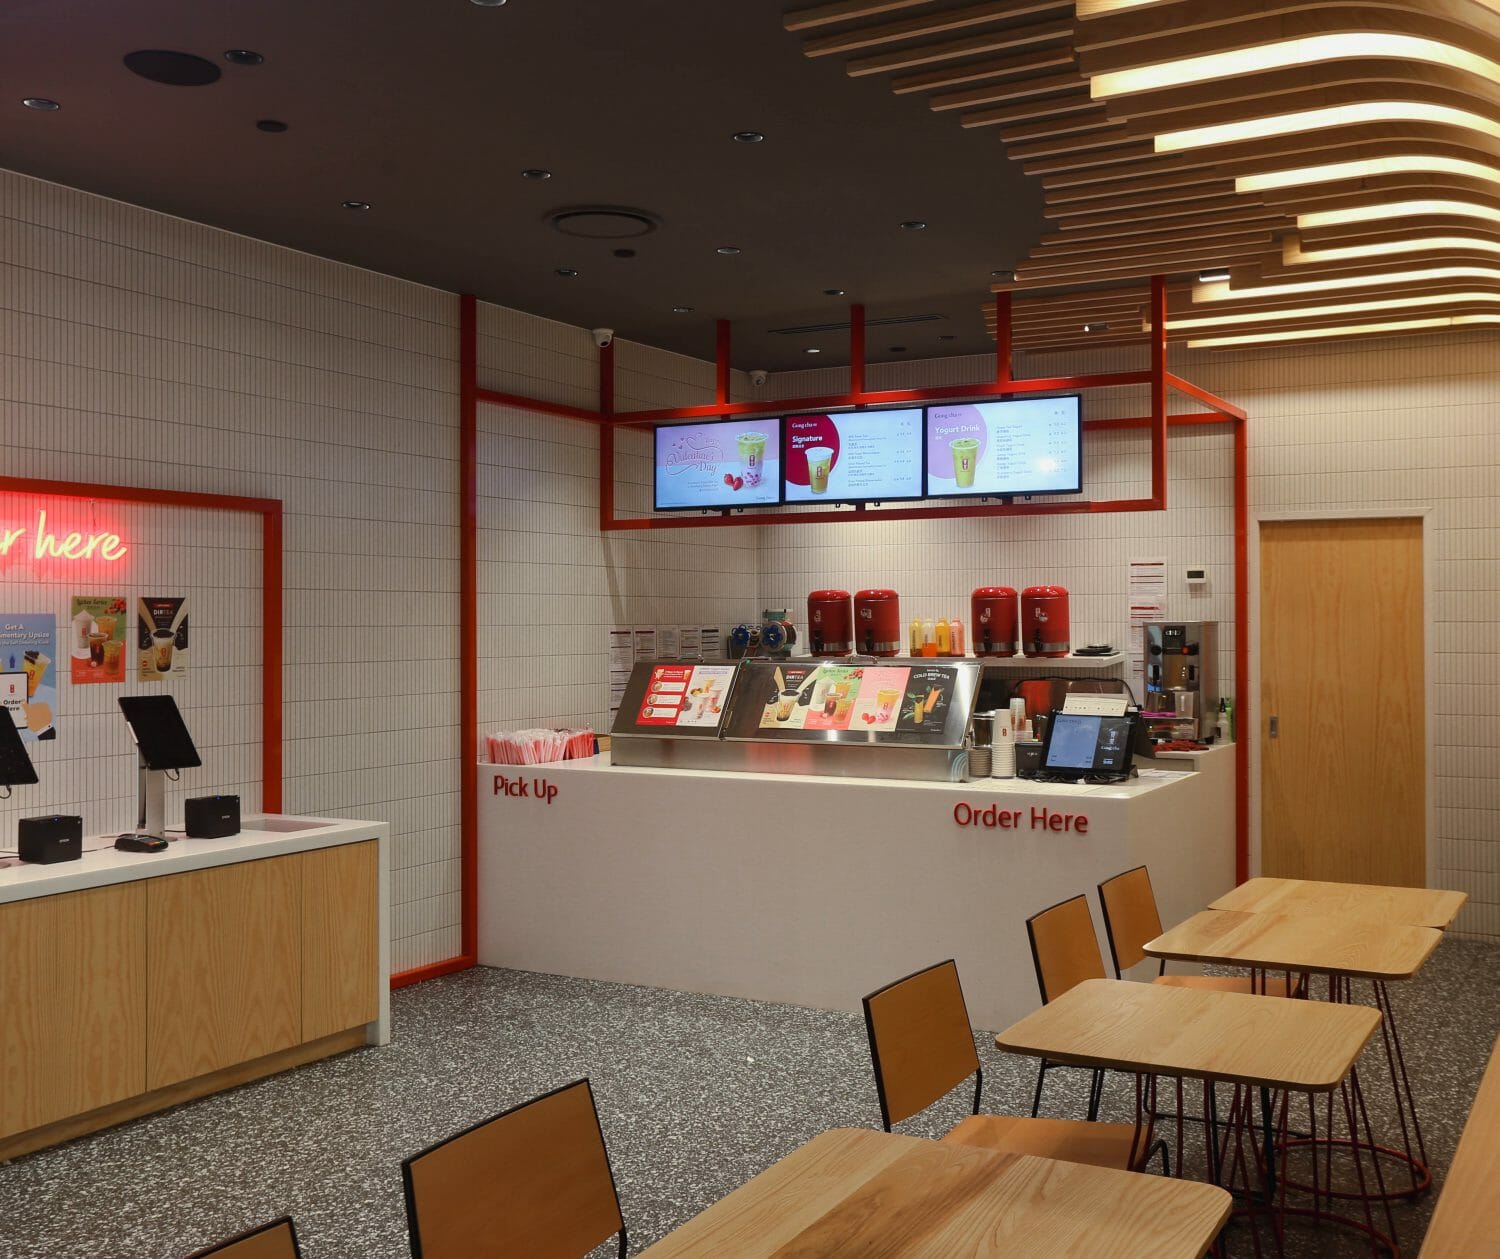 Interior design for Gong Cha